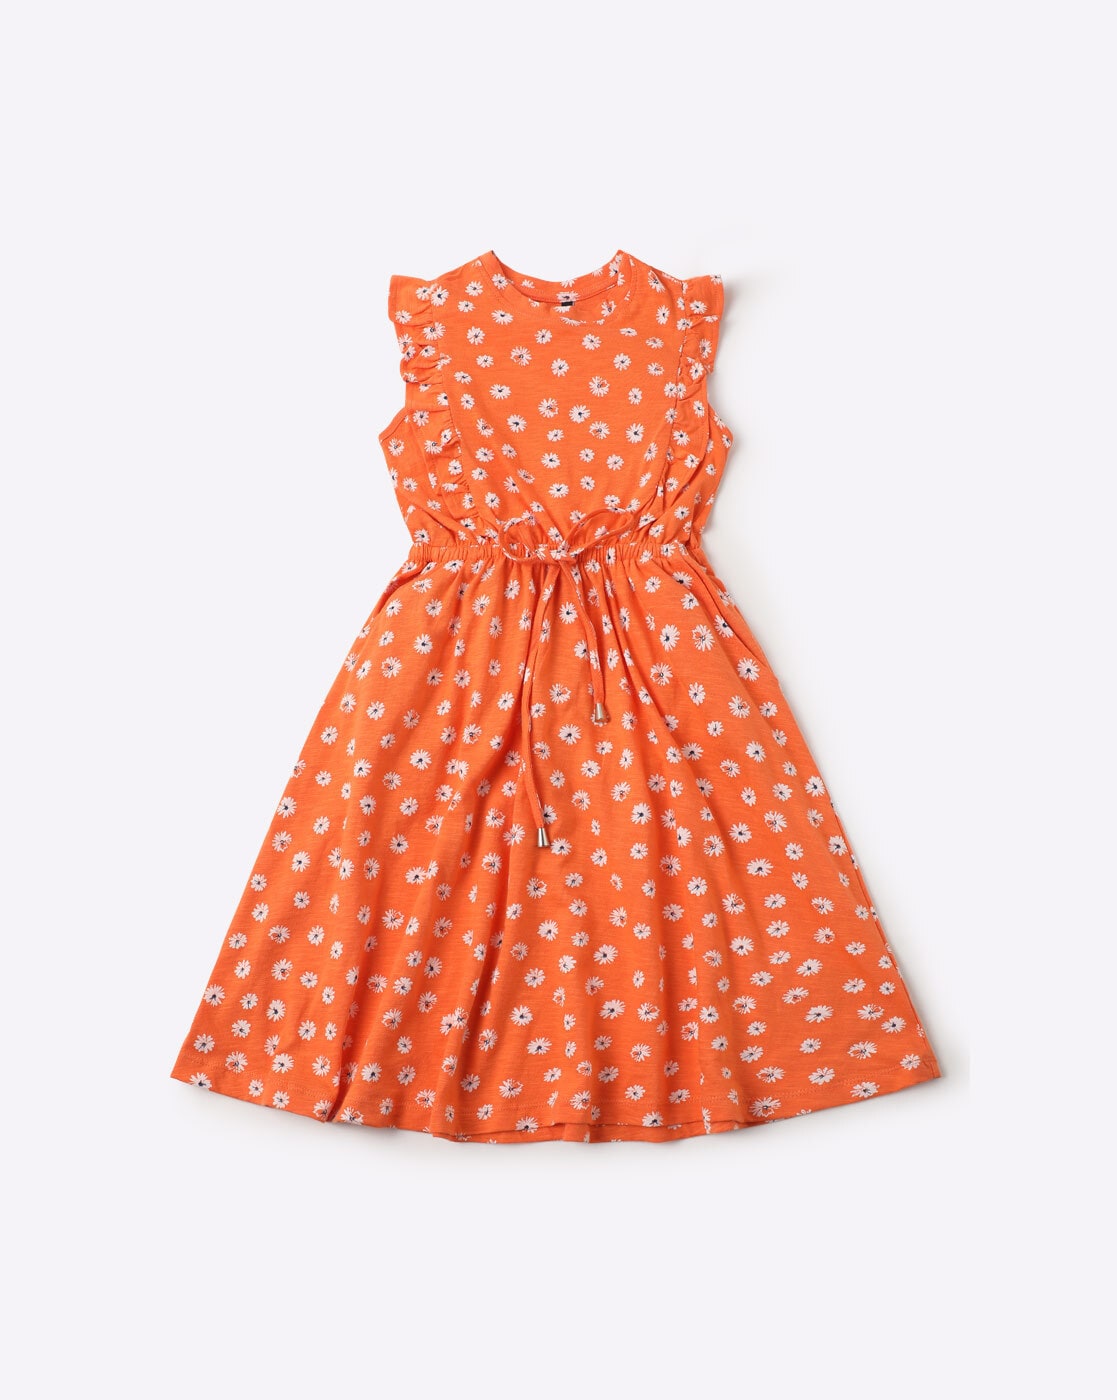 Yellow Floral Dress - Girls Dresses for Spring | ROOLEE Kids